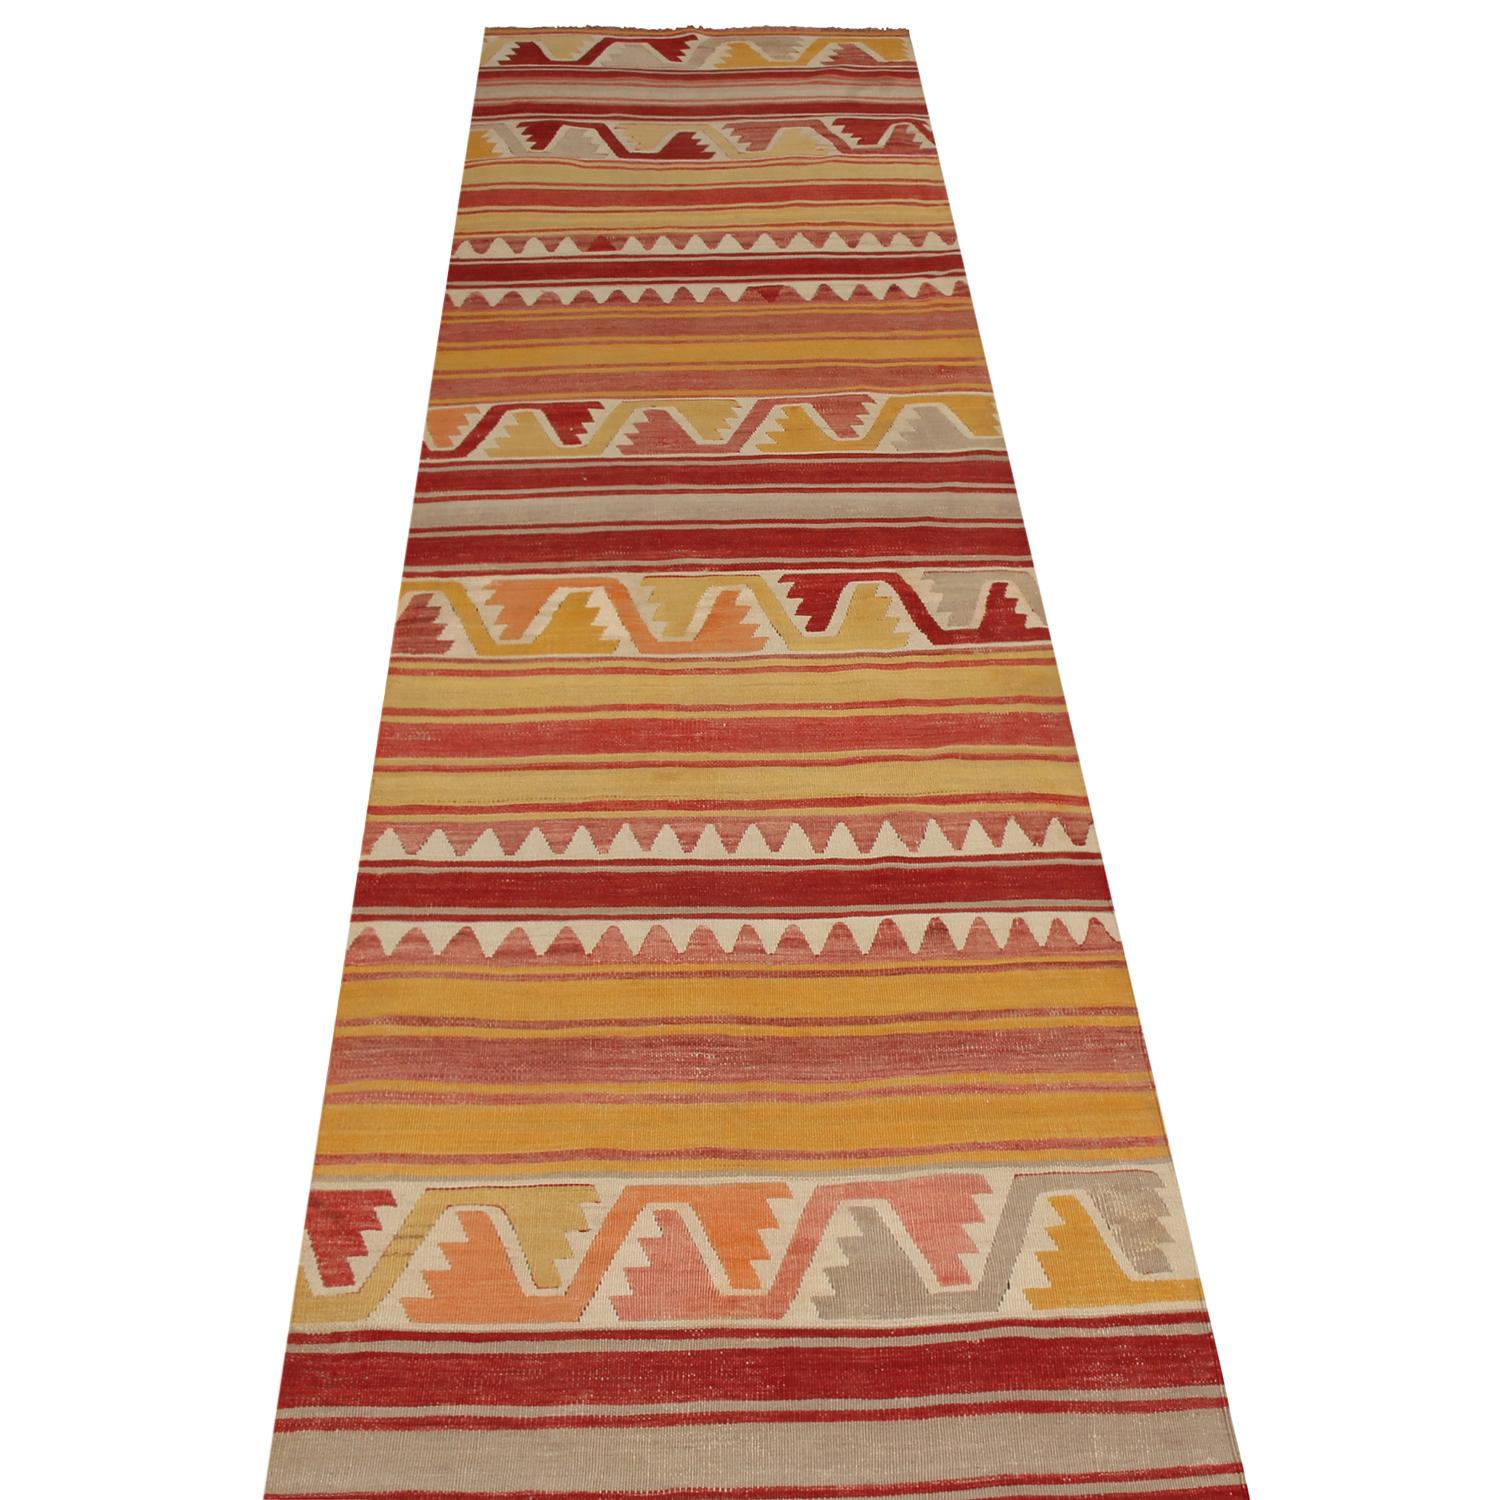 Flat-woven in high-quality wool originating from Turkey between 1940-1950, this vintage Konya Kilim rug enjoys a finely woven, colorfully appealing geometric field design complementing its length with distinguished stripes, enjoying an uncommon